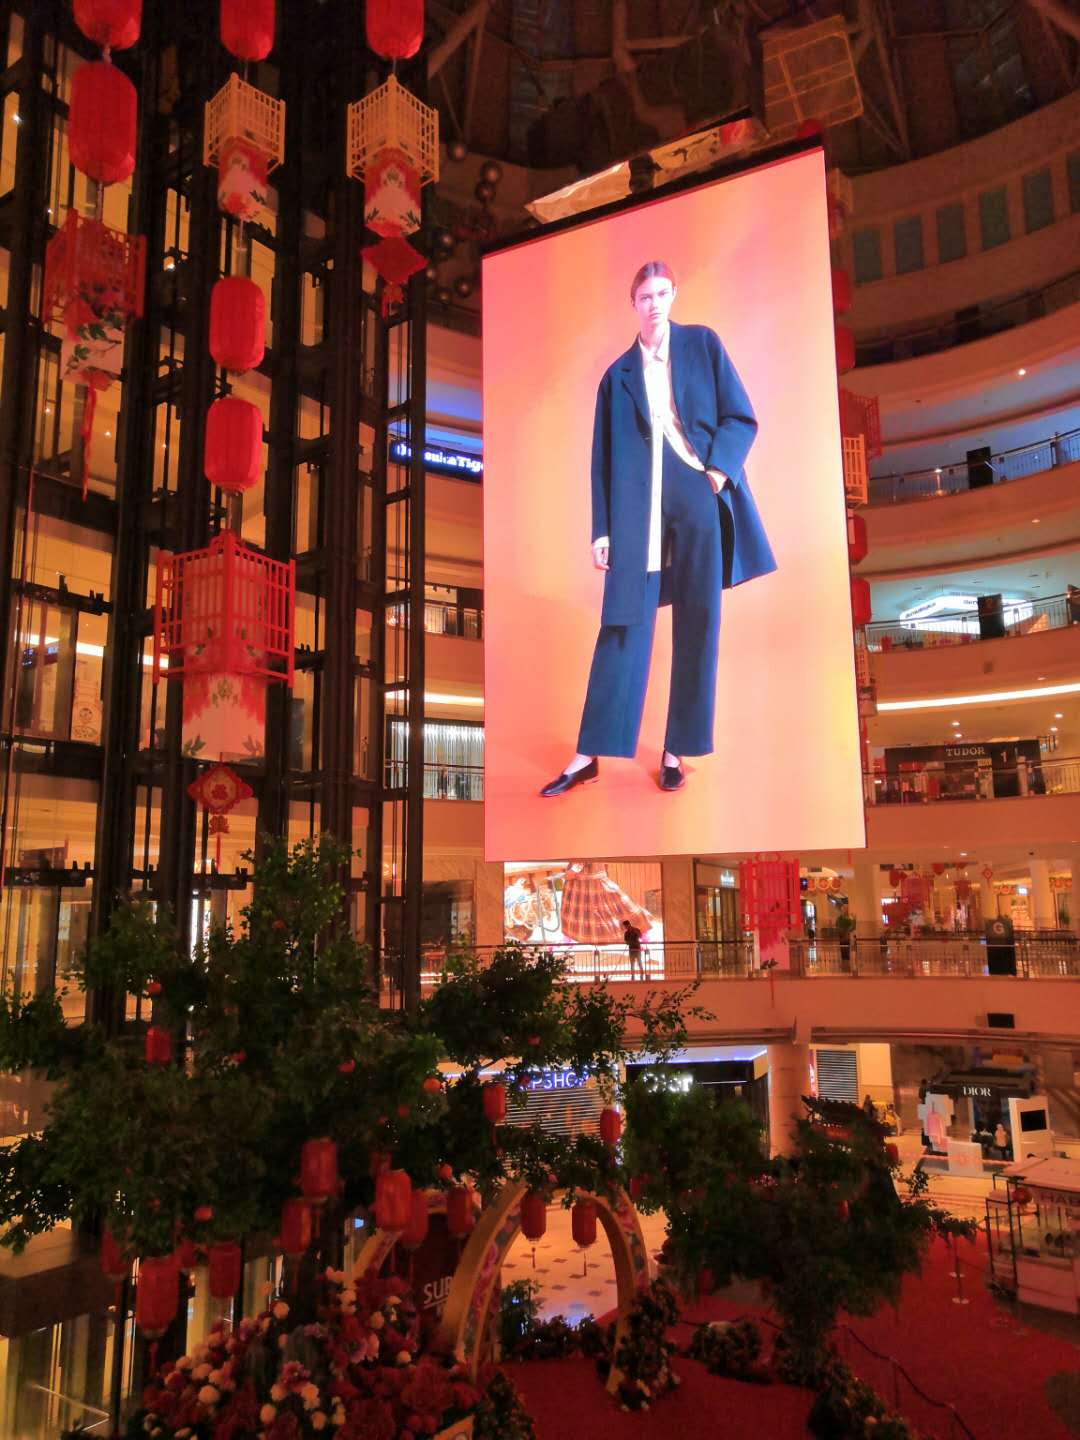 suria-klcc-mall-kl-malaysia-the-world-largest-led-hanging-rotating-double-sided-screen-display-ledsign-engineering3_1_orig